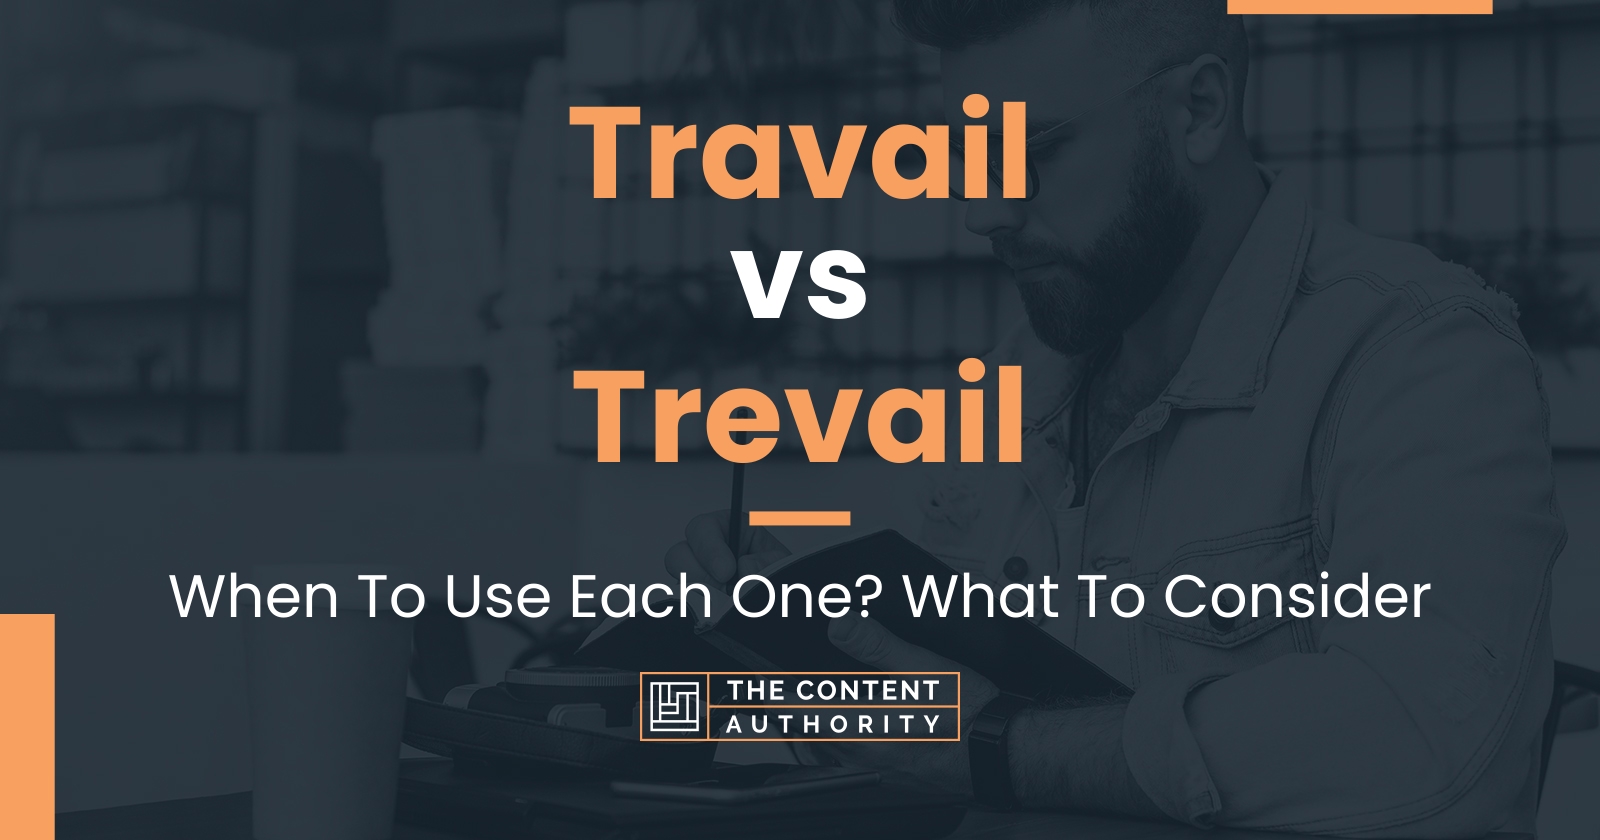 Travail vs Trevail: When To Use Each One? What To Consider